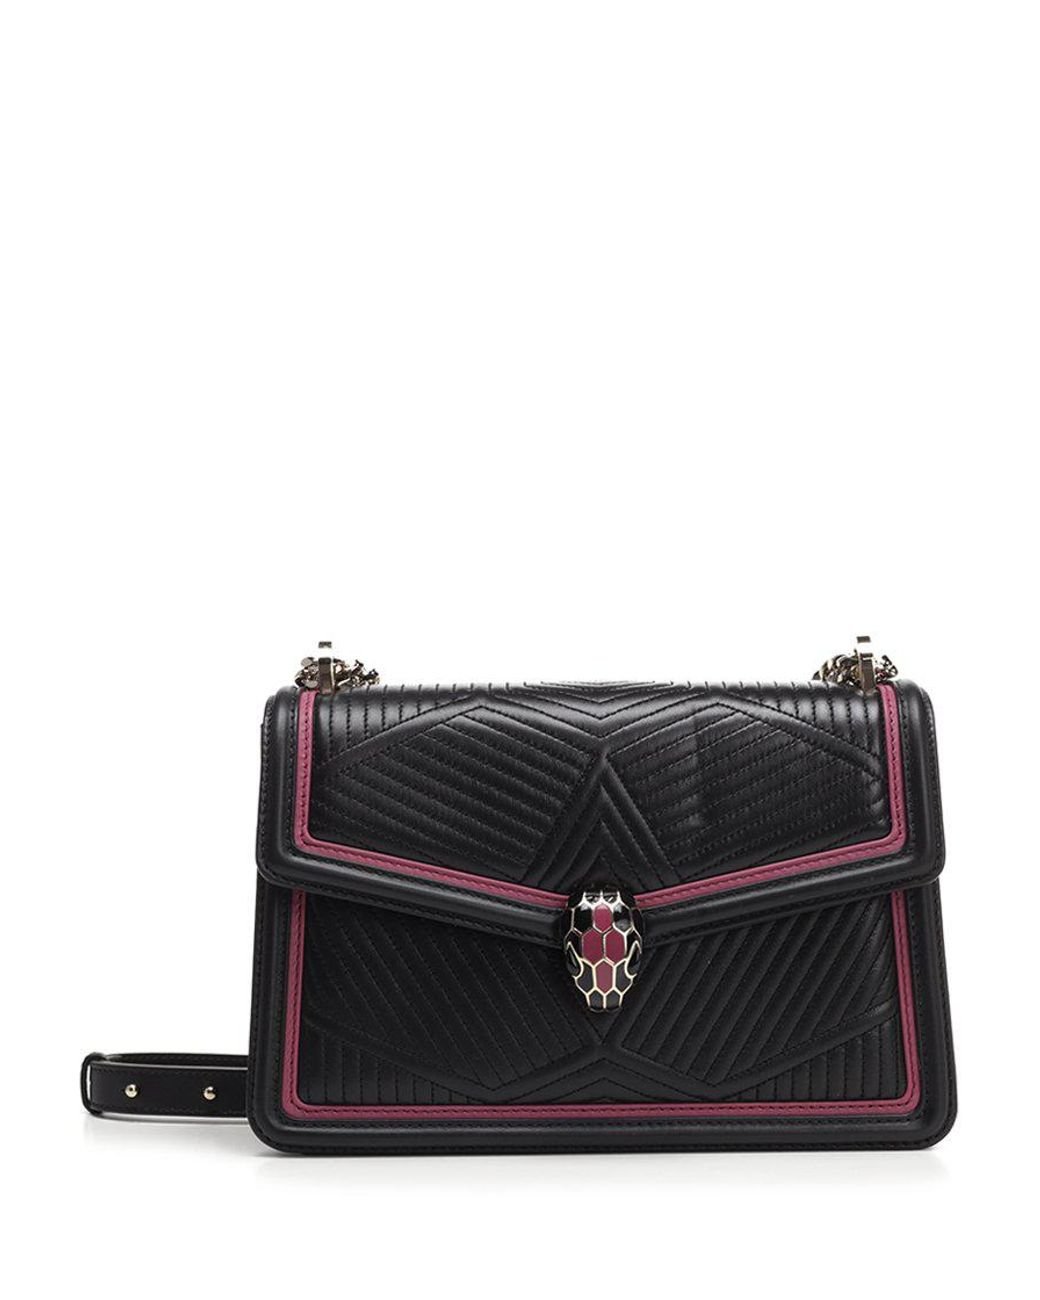 BVLGARI Serpenti Forever Quilted-leather Shoulder Bag in Black | Lyst